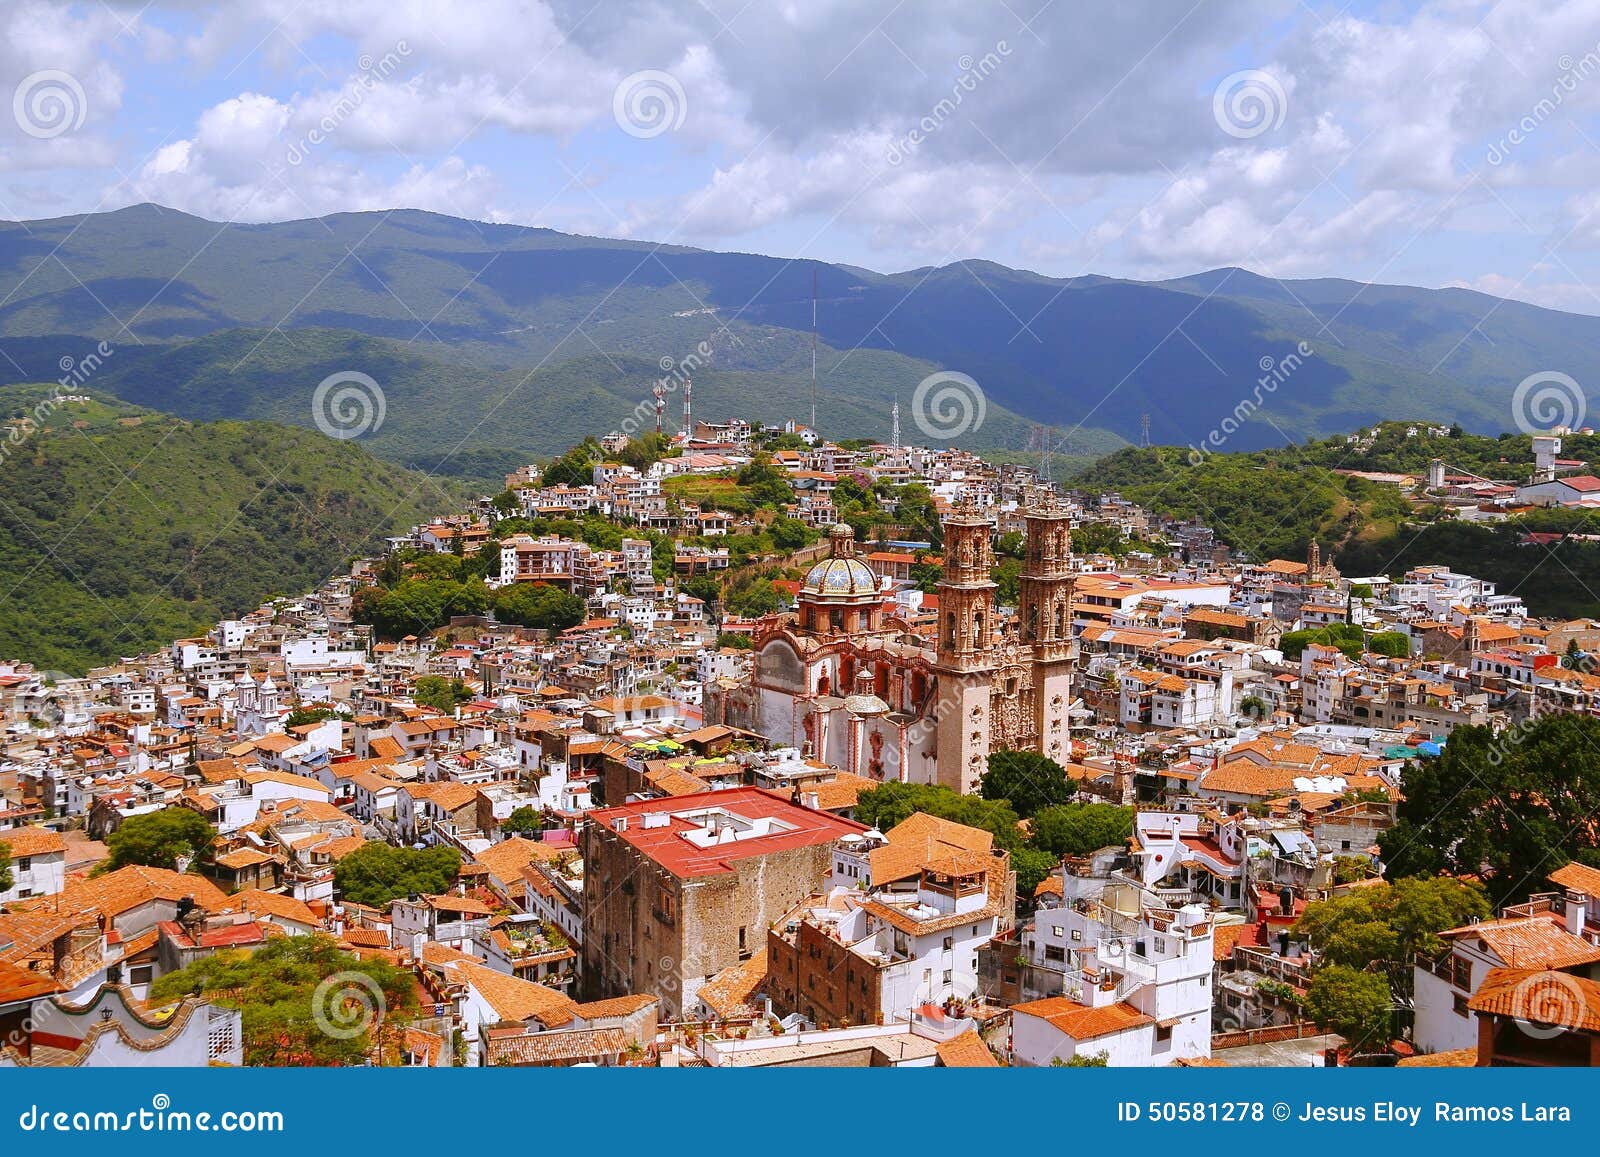 aerial view of the city of taxco, in guerrero xi